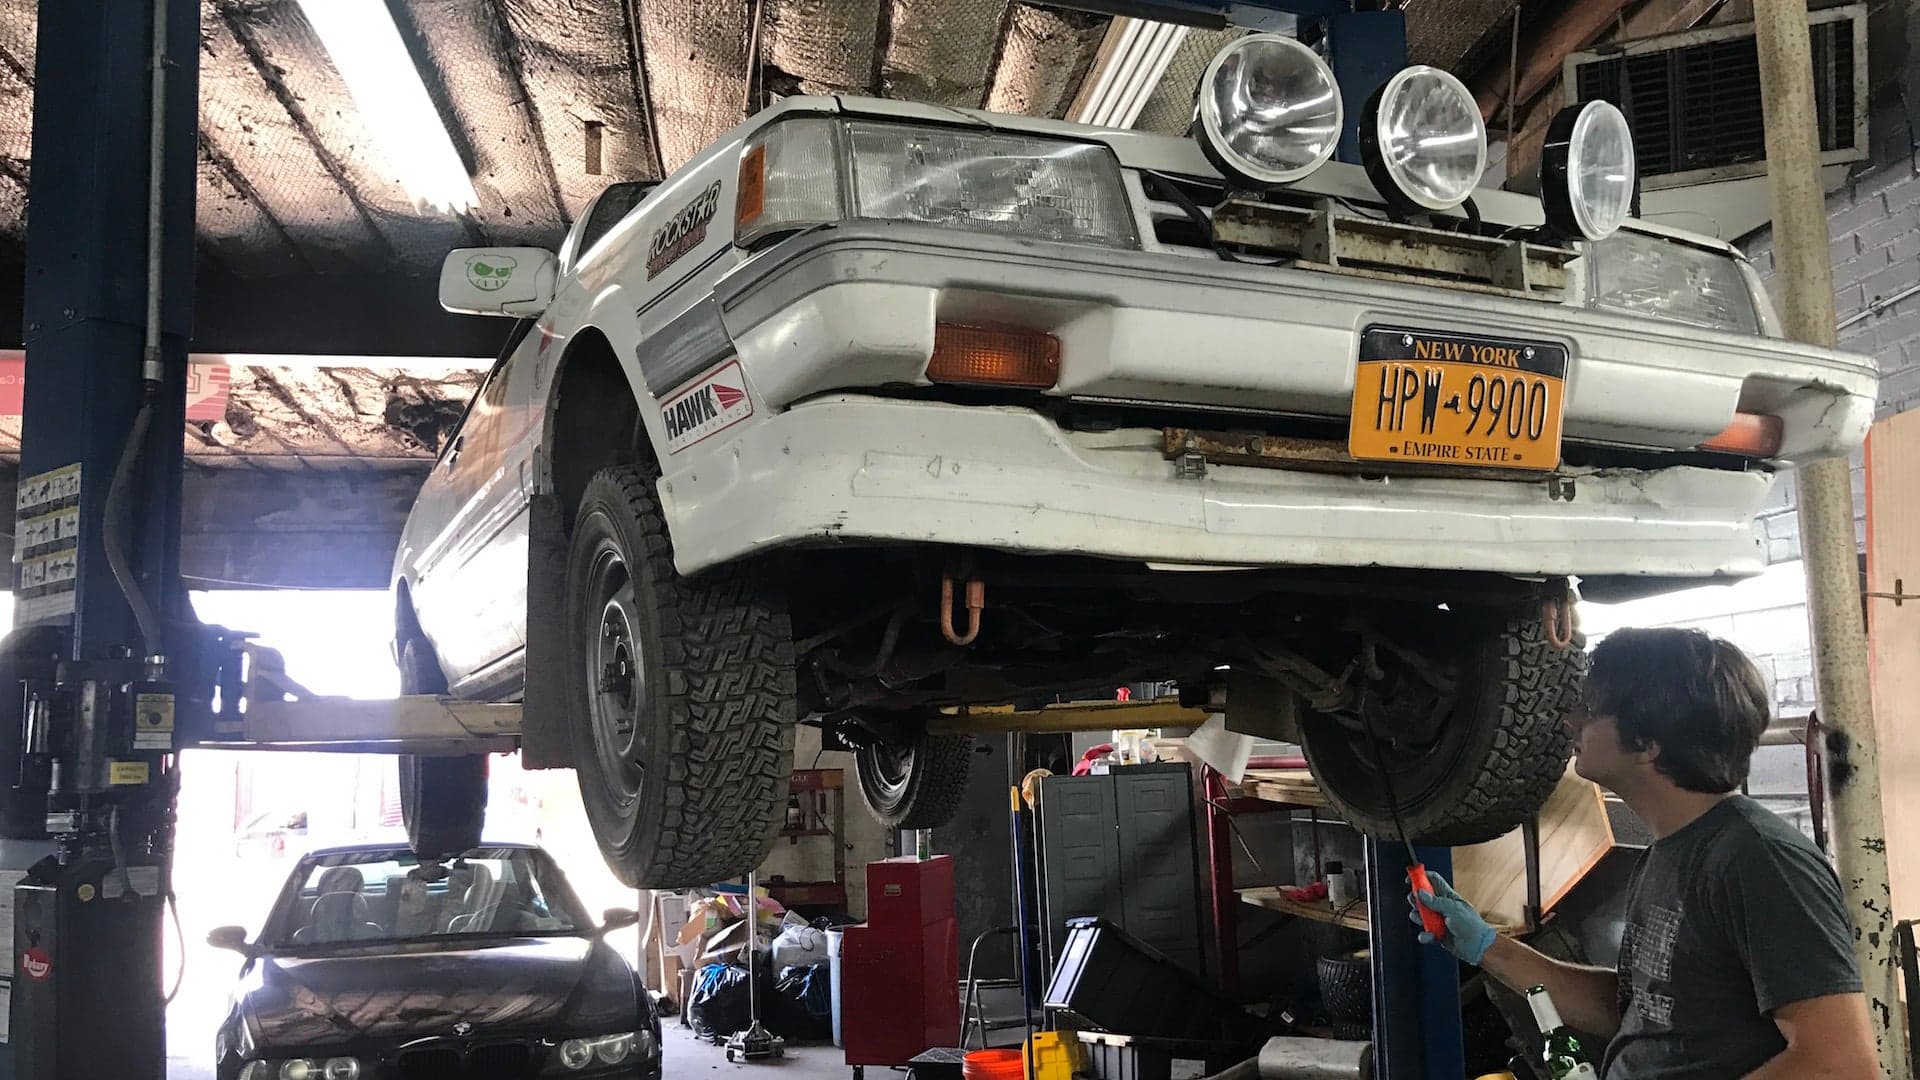 Prepping My Subaru Rally Car for My First Big Race Is Terrifying